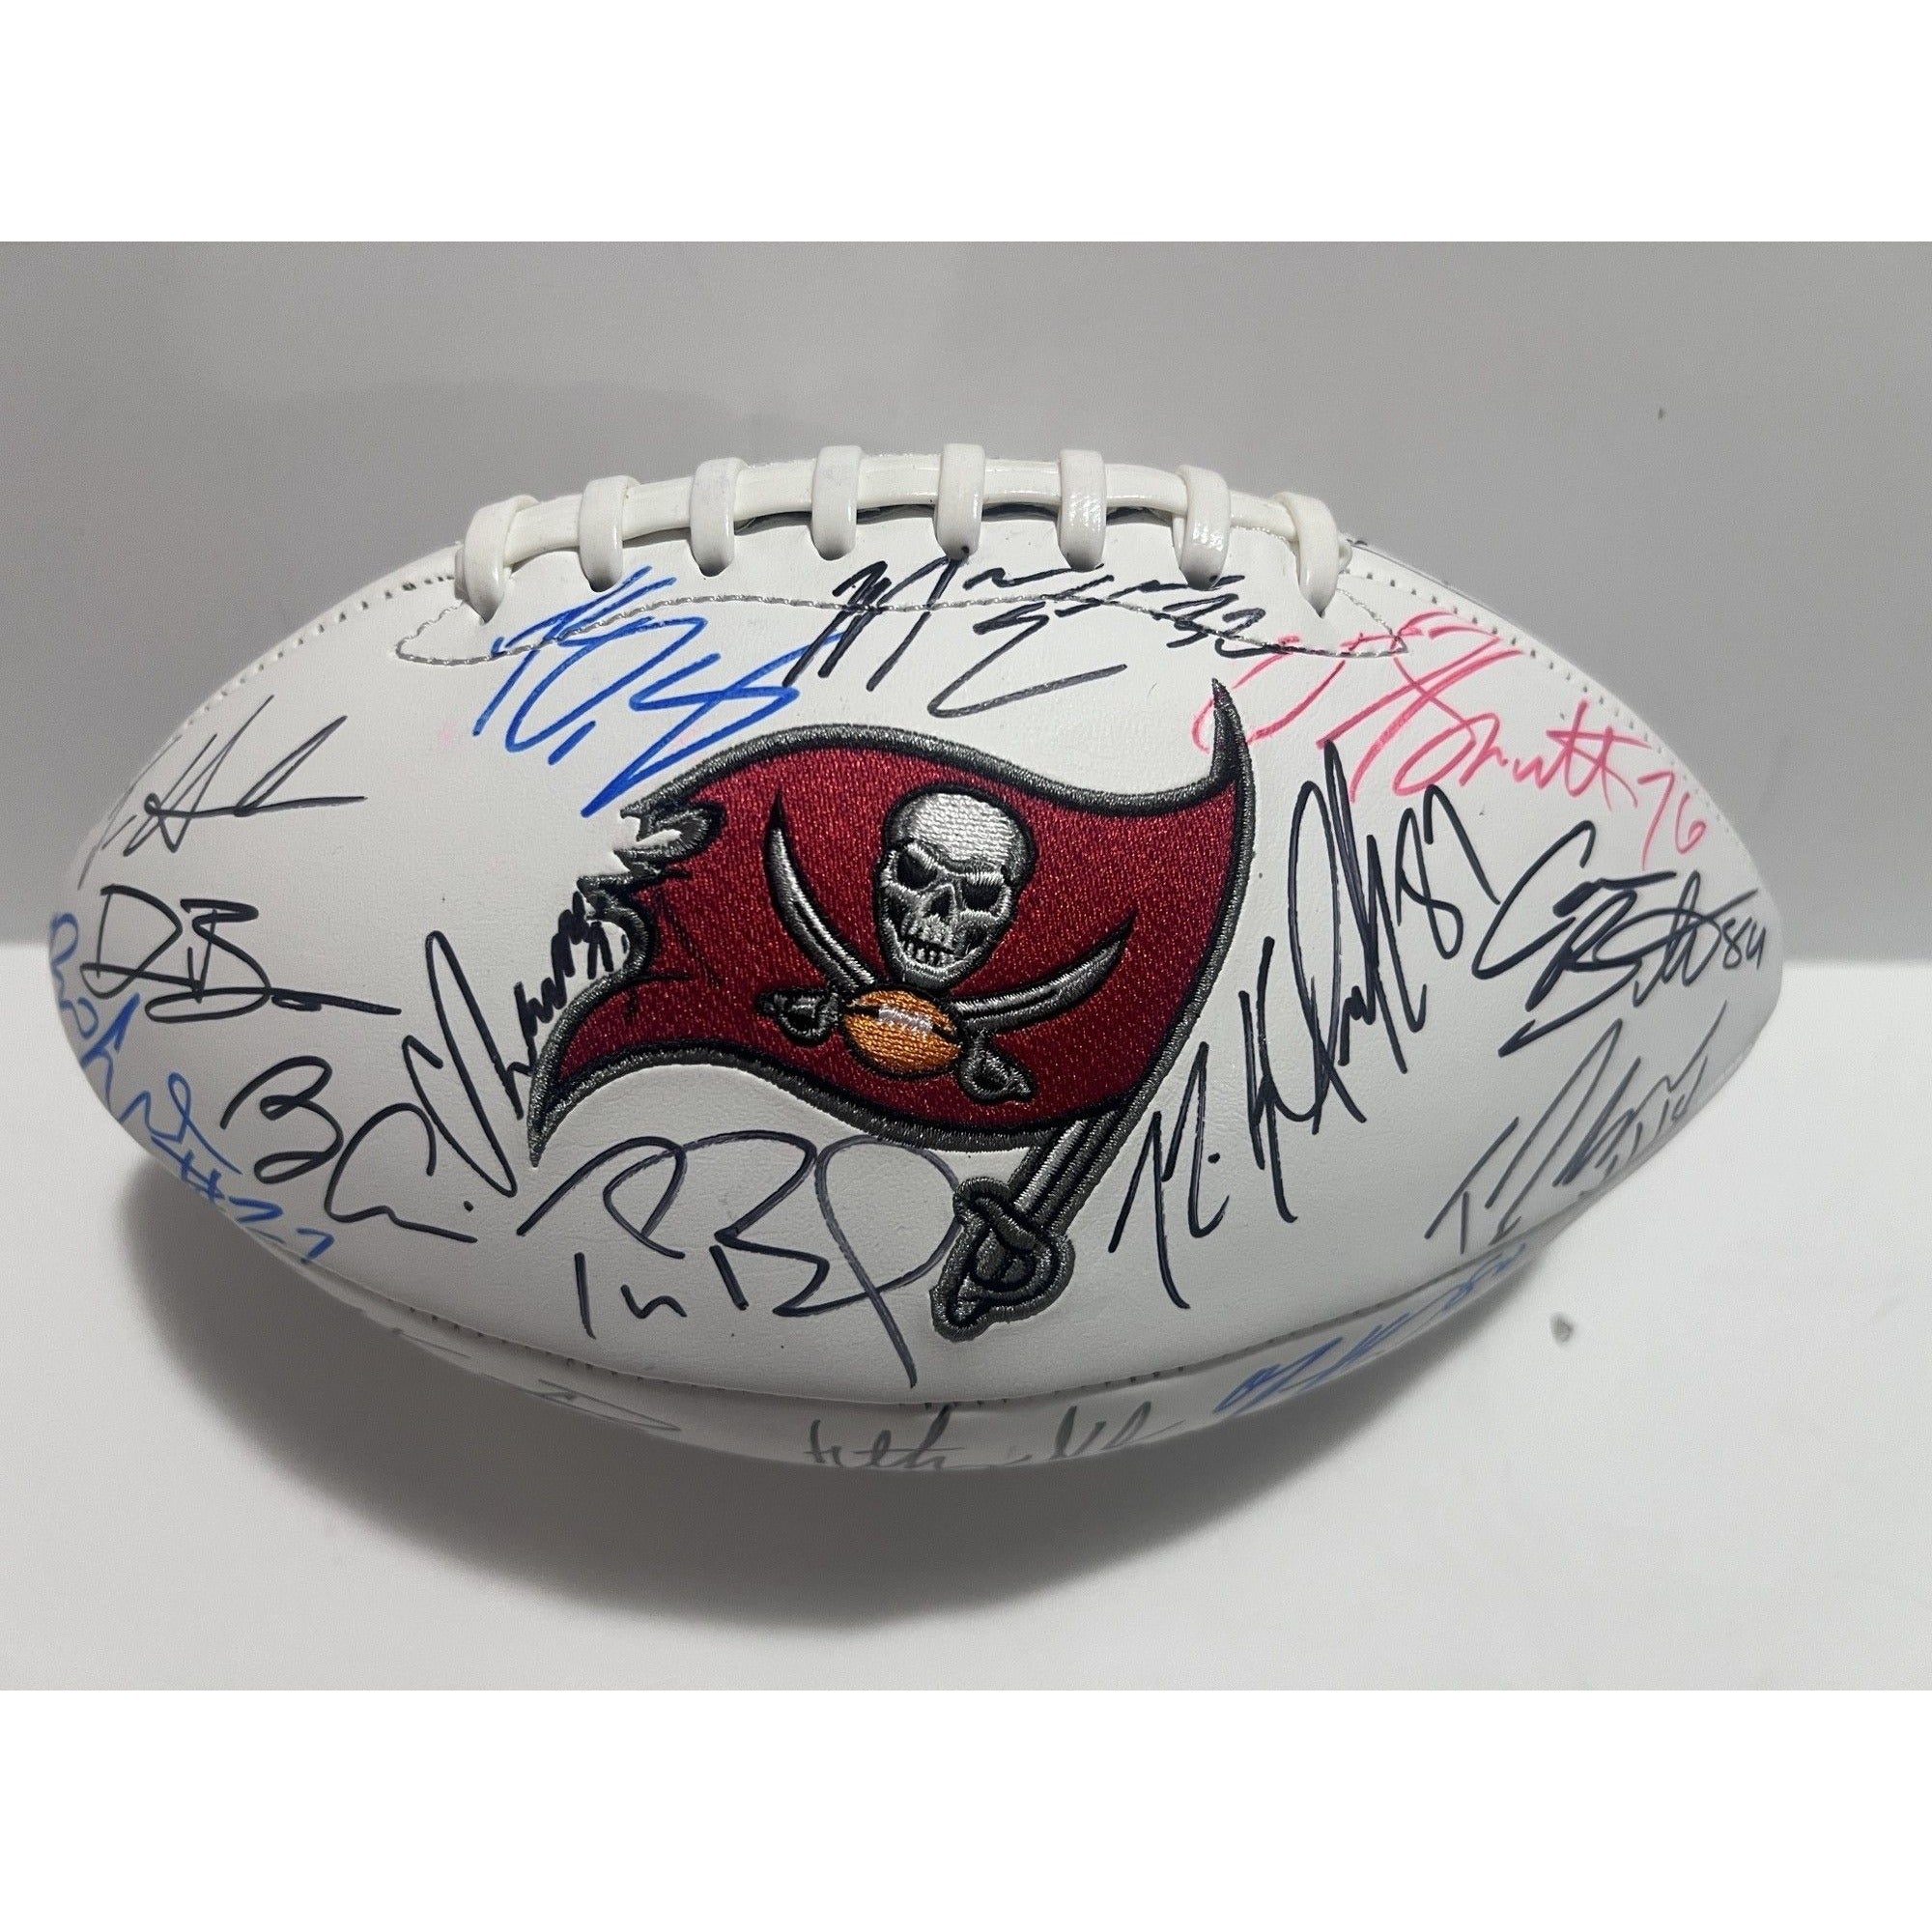 Tampa Bay Buccaneers 2021 Super Bowl champions Tom Brady Bruce Arians Rob Gronkowski Mike Evans complete team signed football with proof